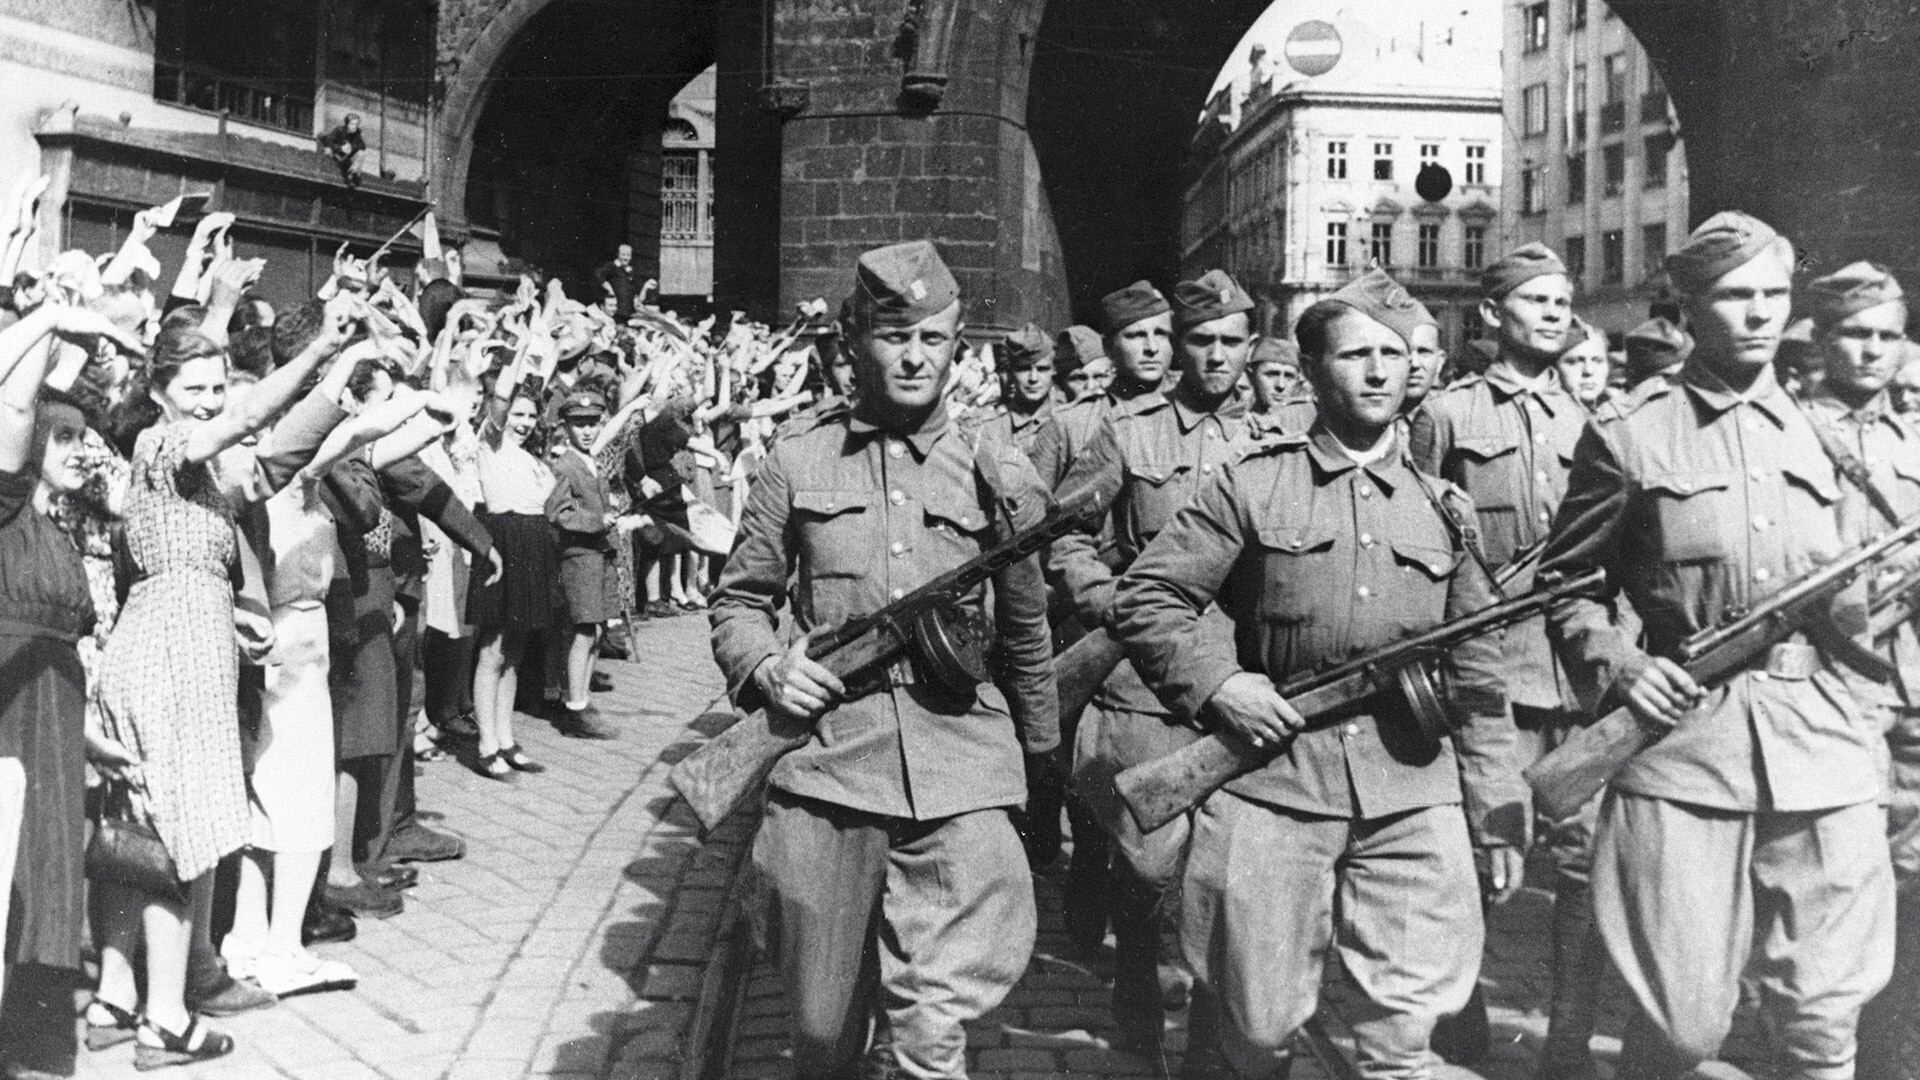 Prague townsfolk welcome the Czechoslovak corps soldiers who together with the Red Army liberated the country from the Nazi occupation.